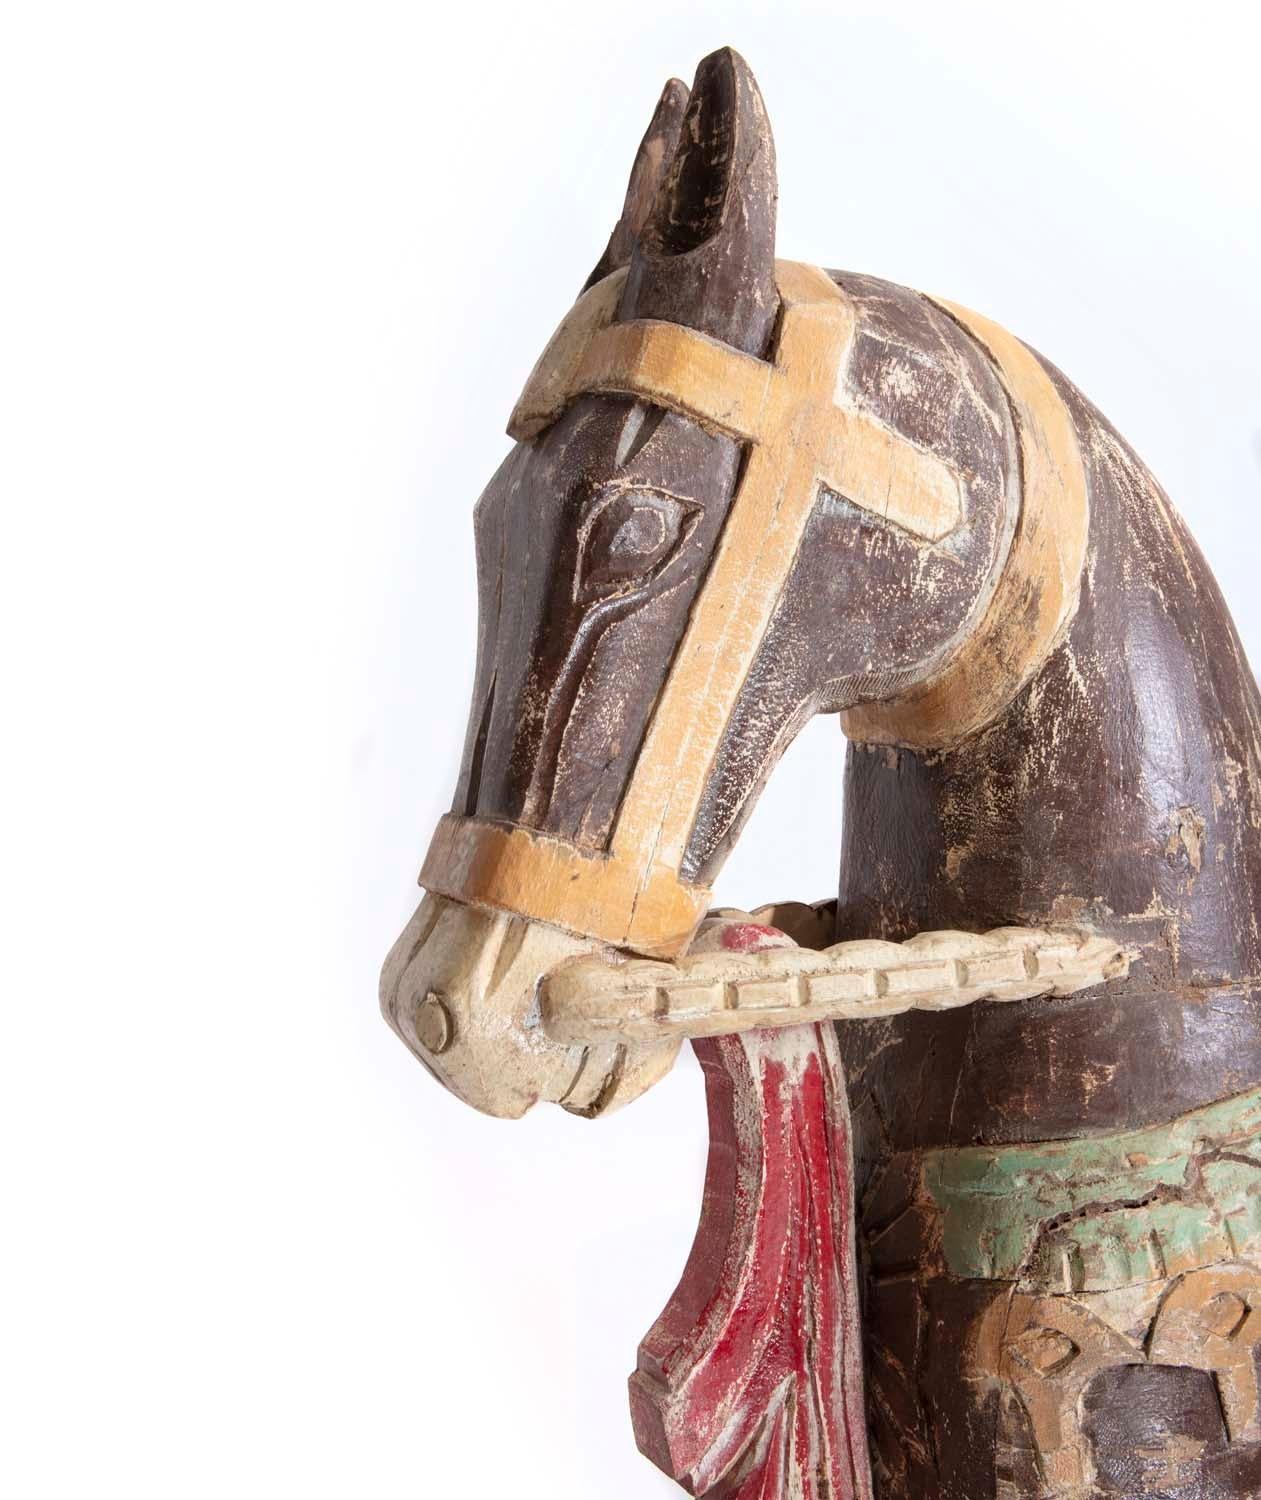 20th Century Four Foot Tall Antique Hand-Painted Wooden Horse with Bird Saddle from India For Sale